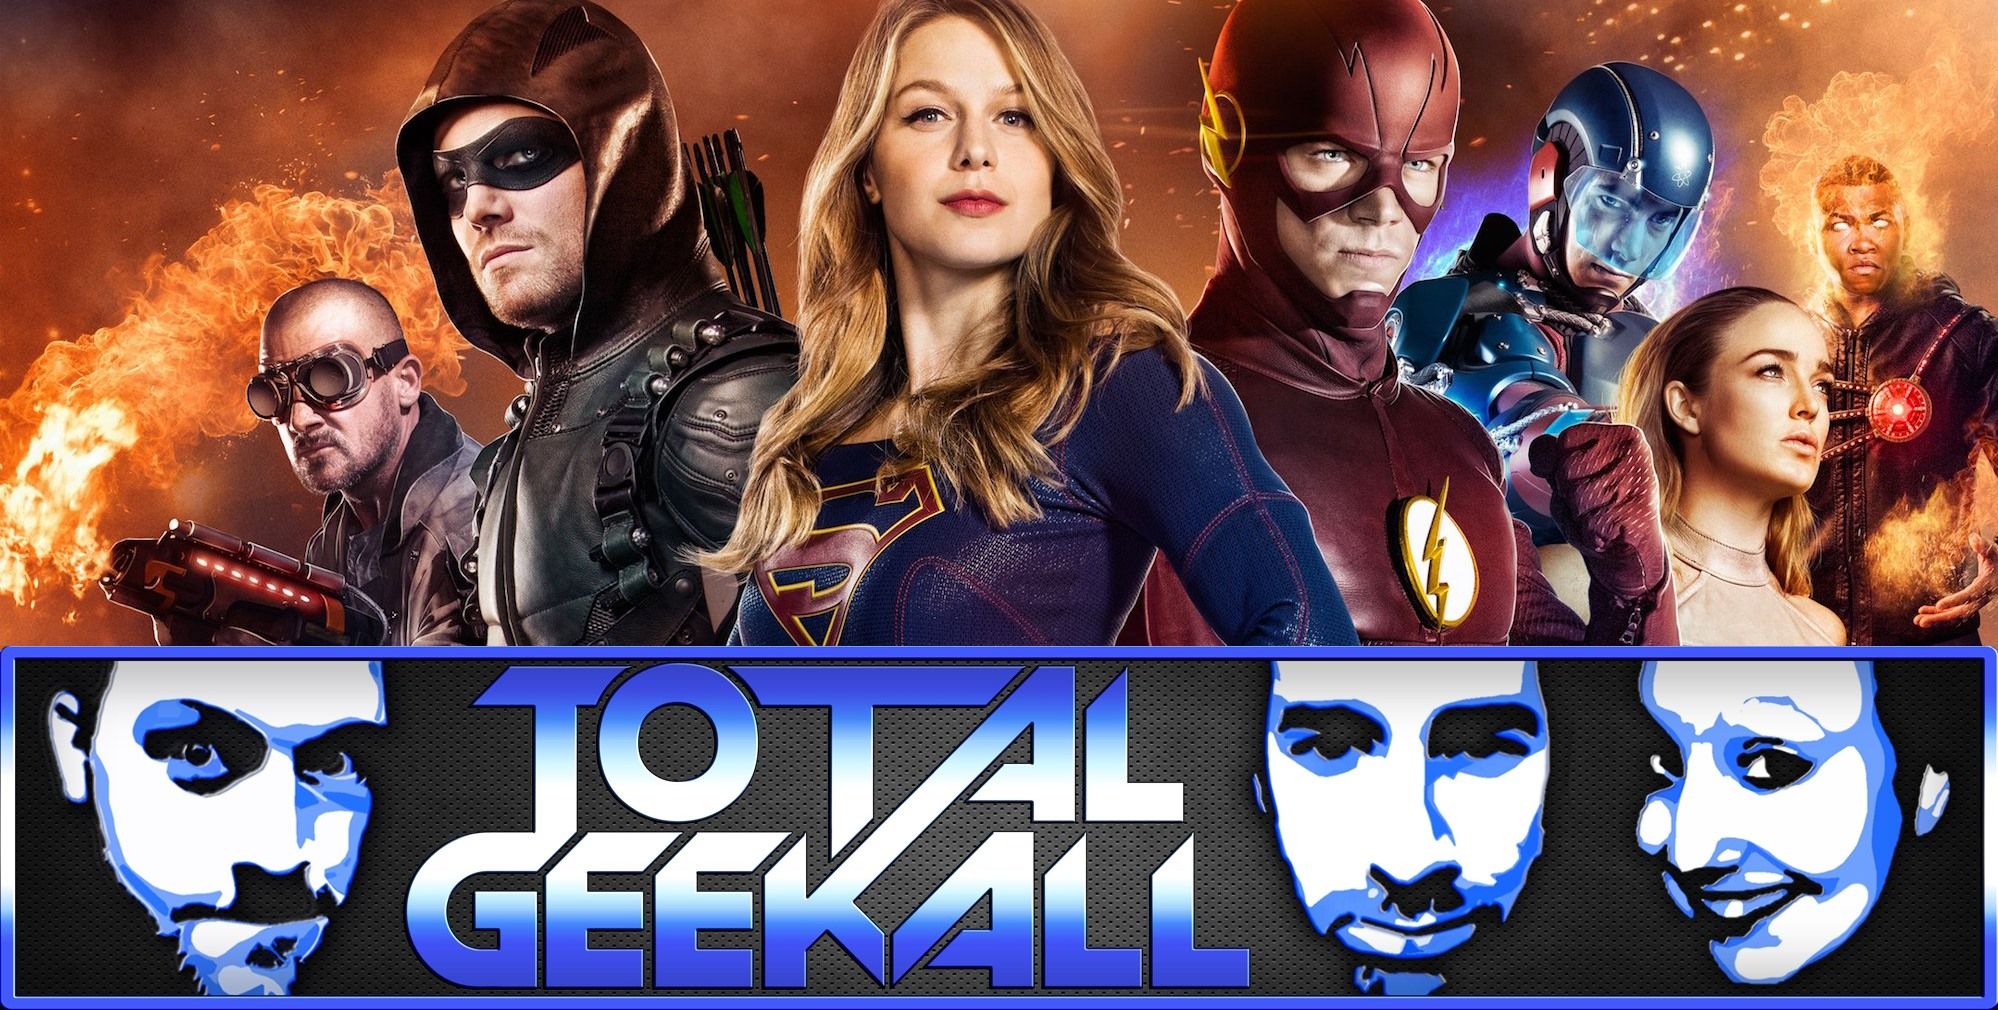 Arrowverse Crossover Event 'Invasion!' – Total Geekall #44